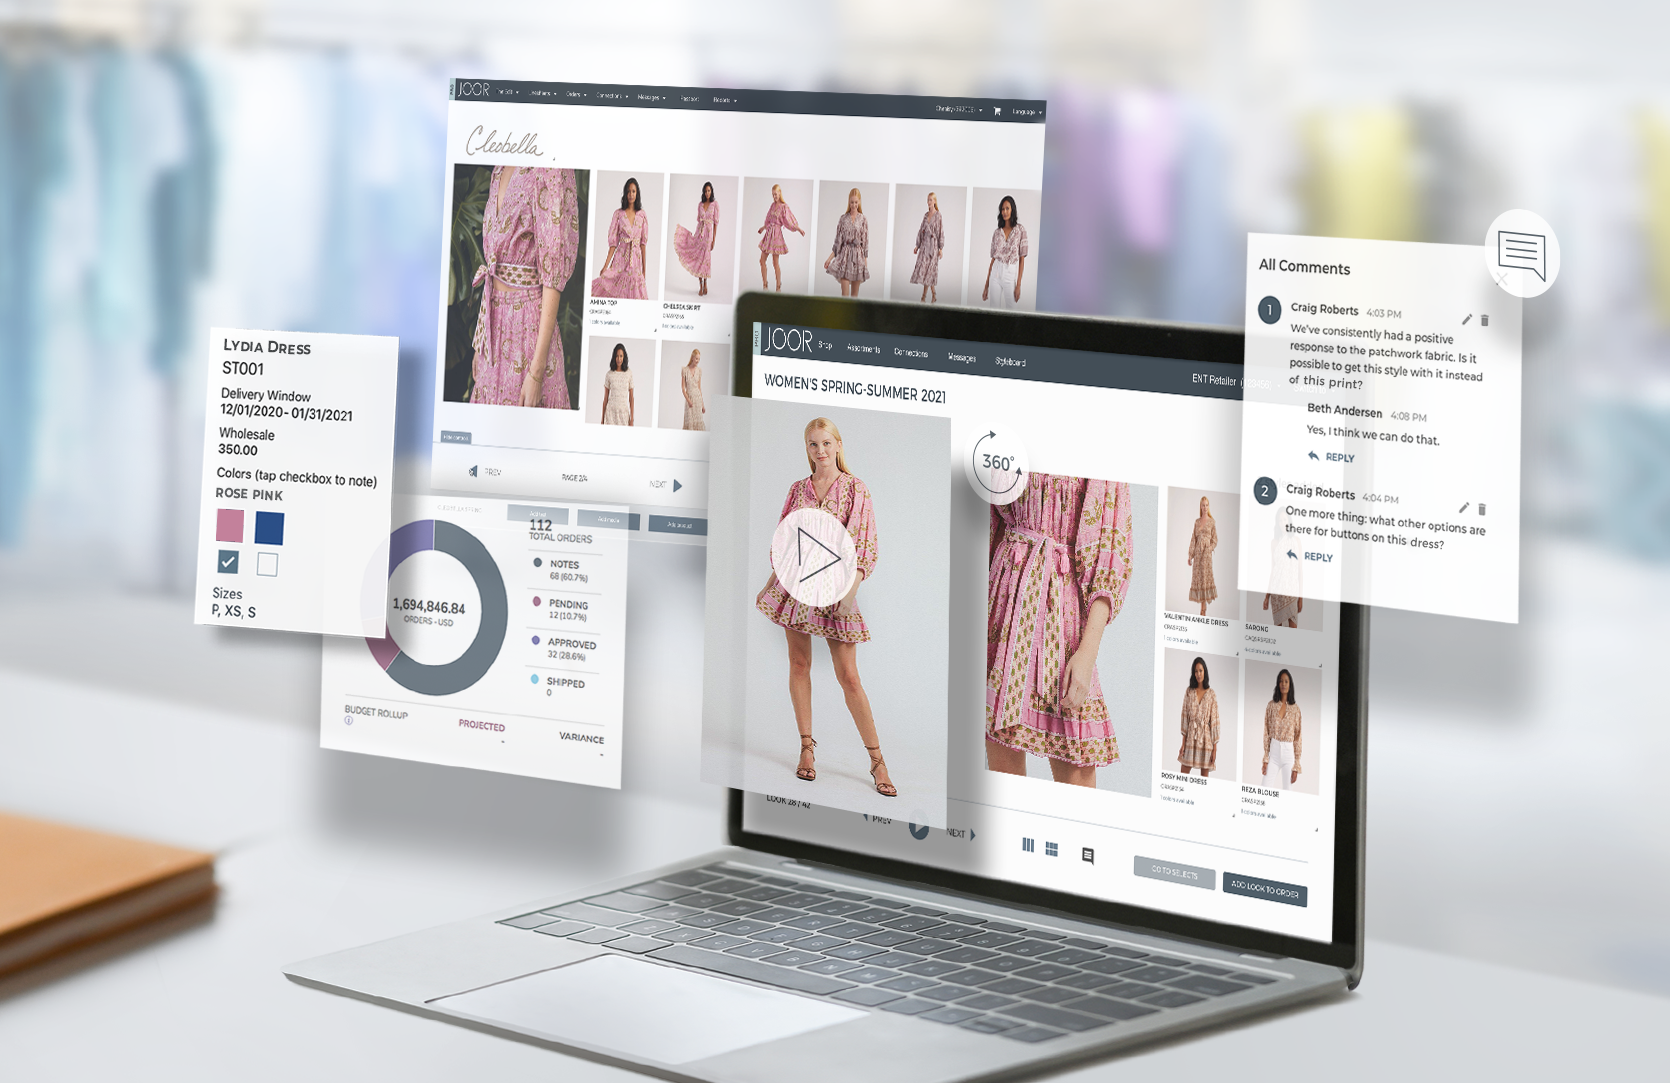 JOOR is the premier wholesale B2B ecommerce platform for the fashion industry, connecting brands and retailers globally. Brands can create and present captivating, shoppable collections while collaborating and transacting with buyers.